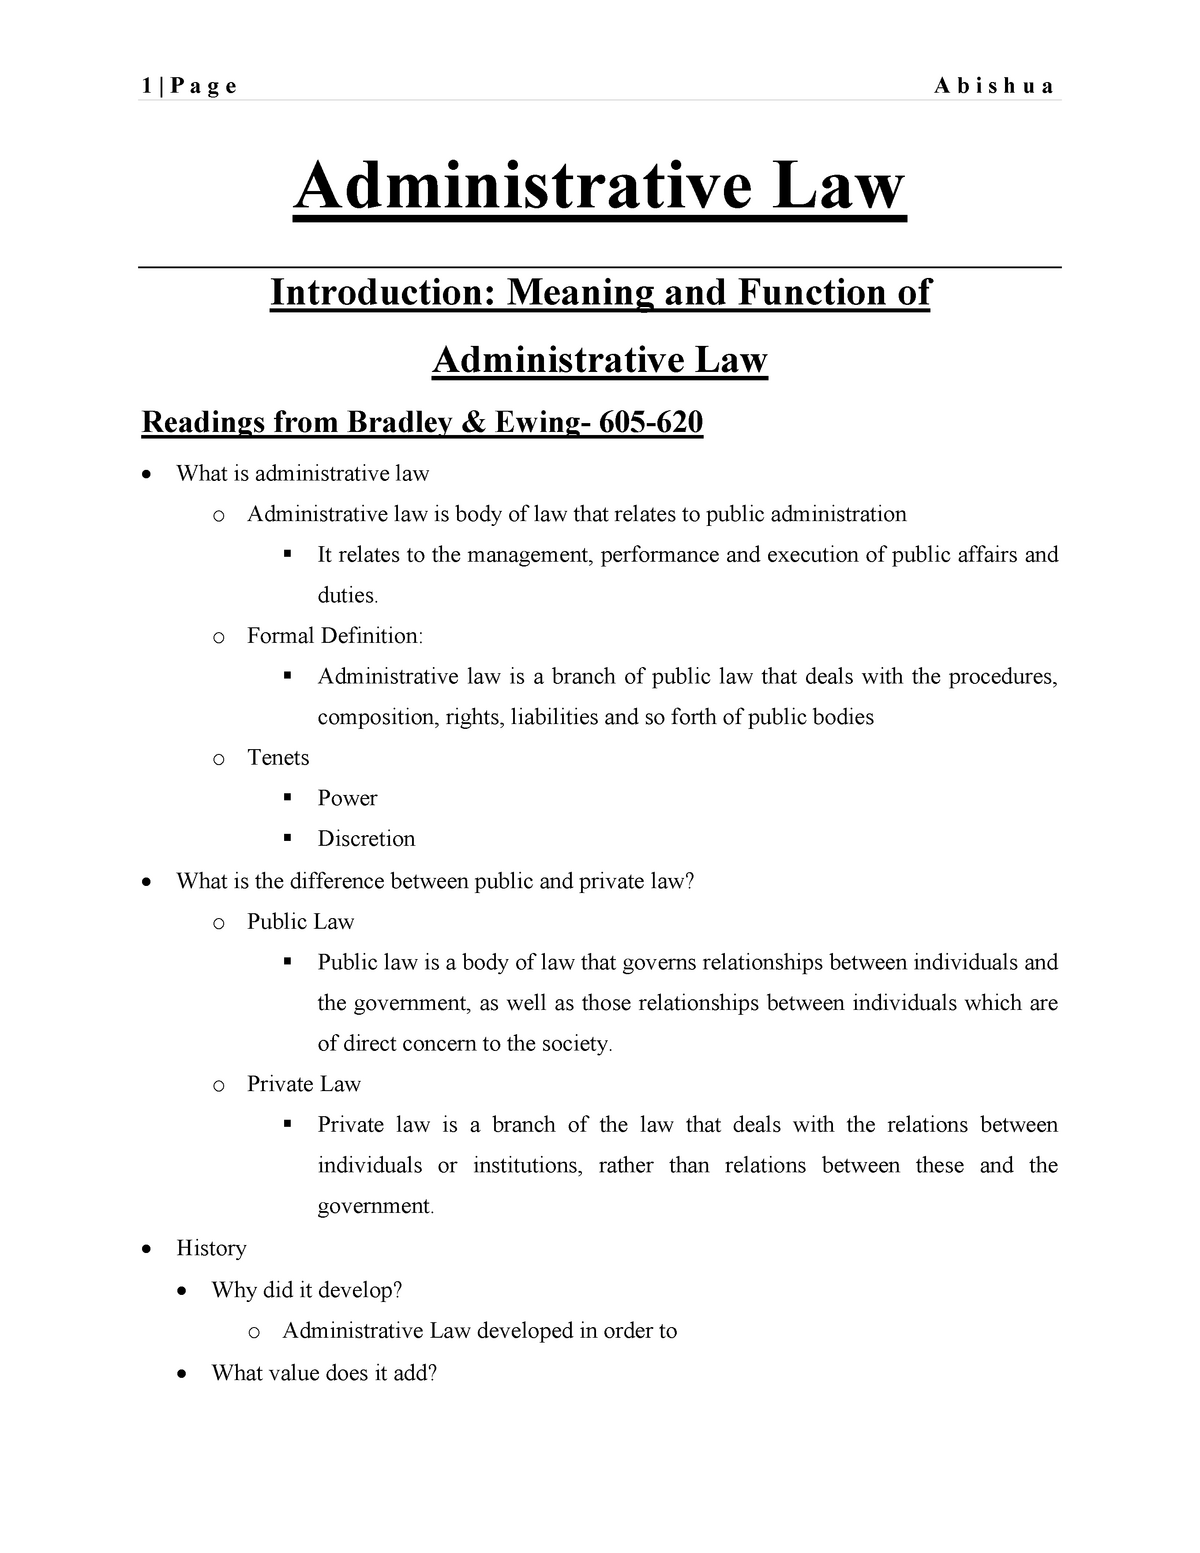 research paper administrative law